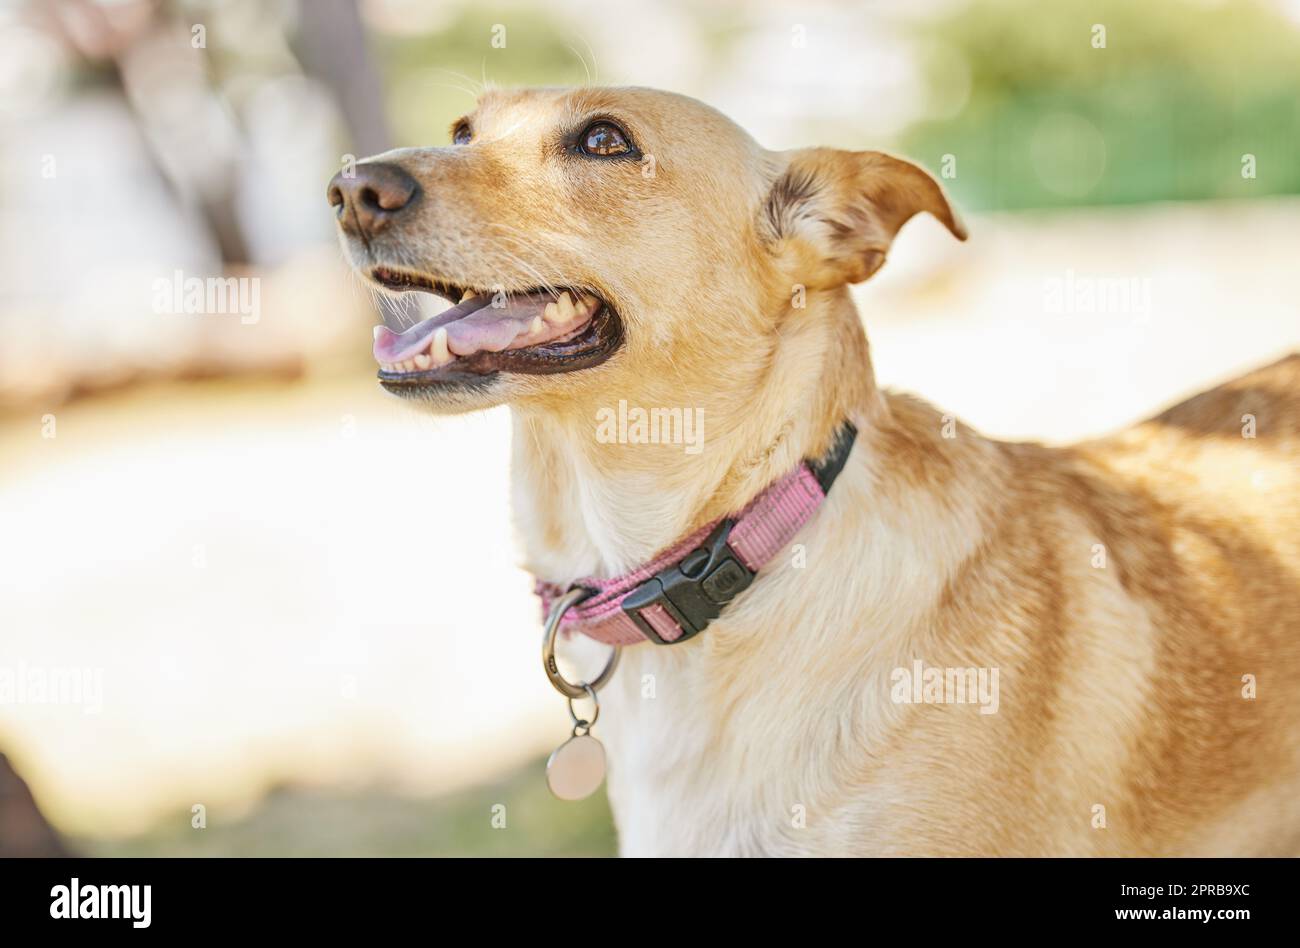 Mans best friend. an adorable dog outside in the yard. Stock Photo